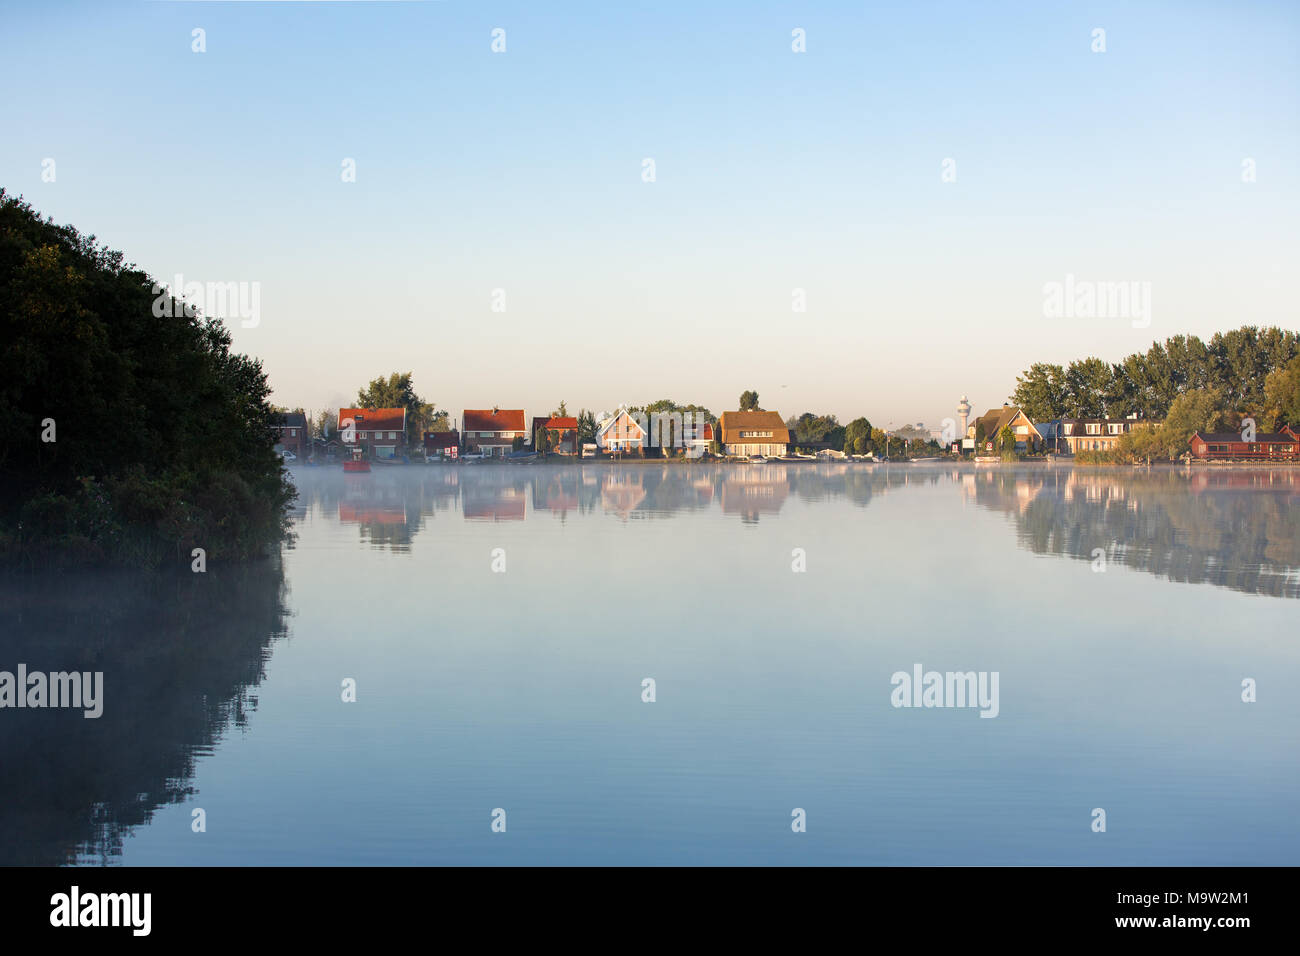 Airtrafic tower and houses on a windless and foggy morning at lake 'Nieuwe Meer' in Amsterdam the Netherlands. Stock Photo